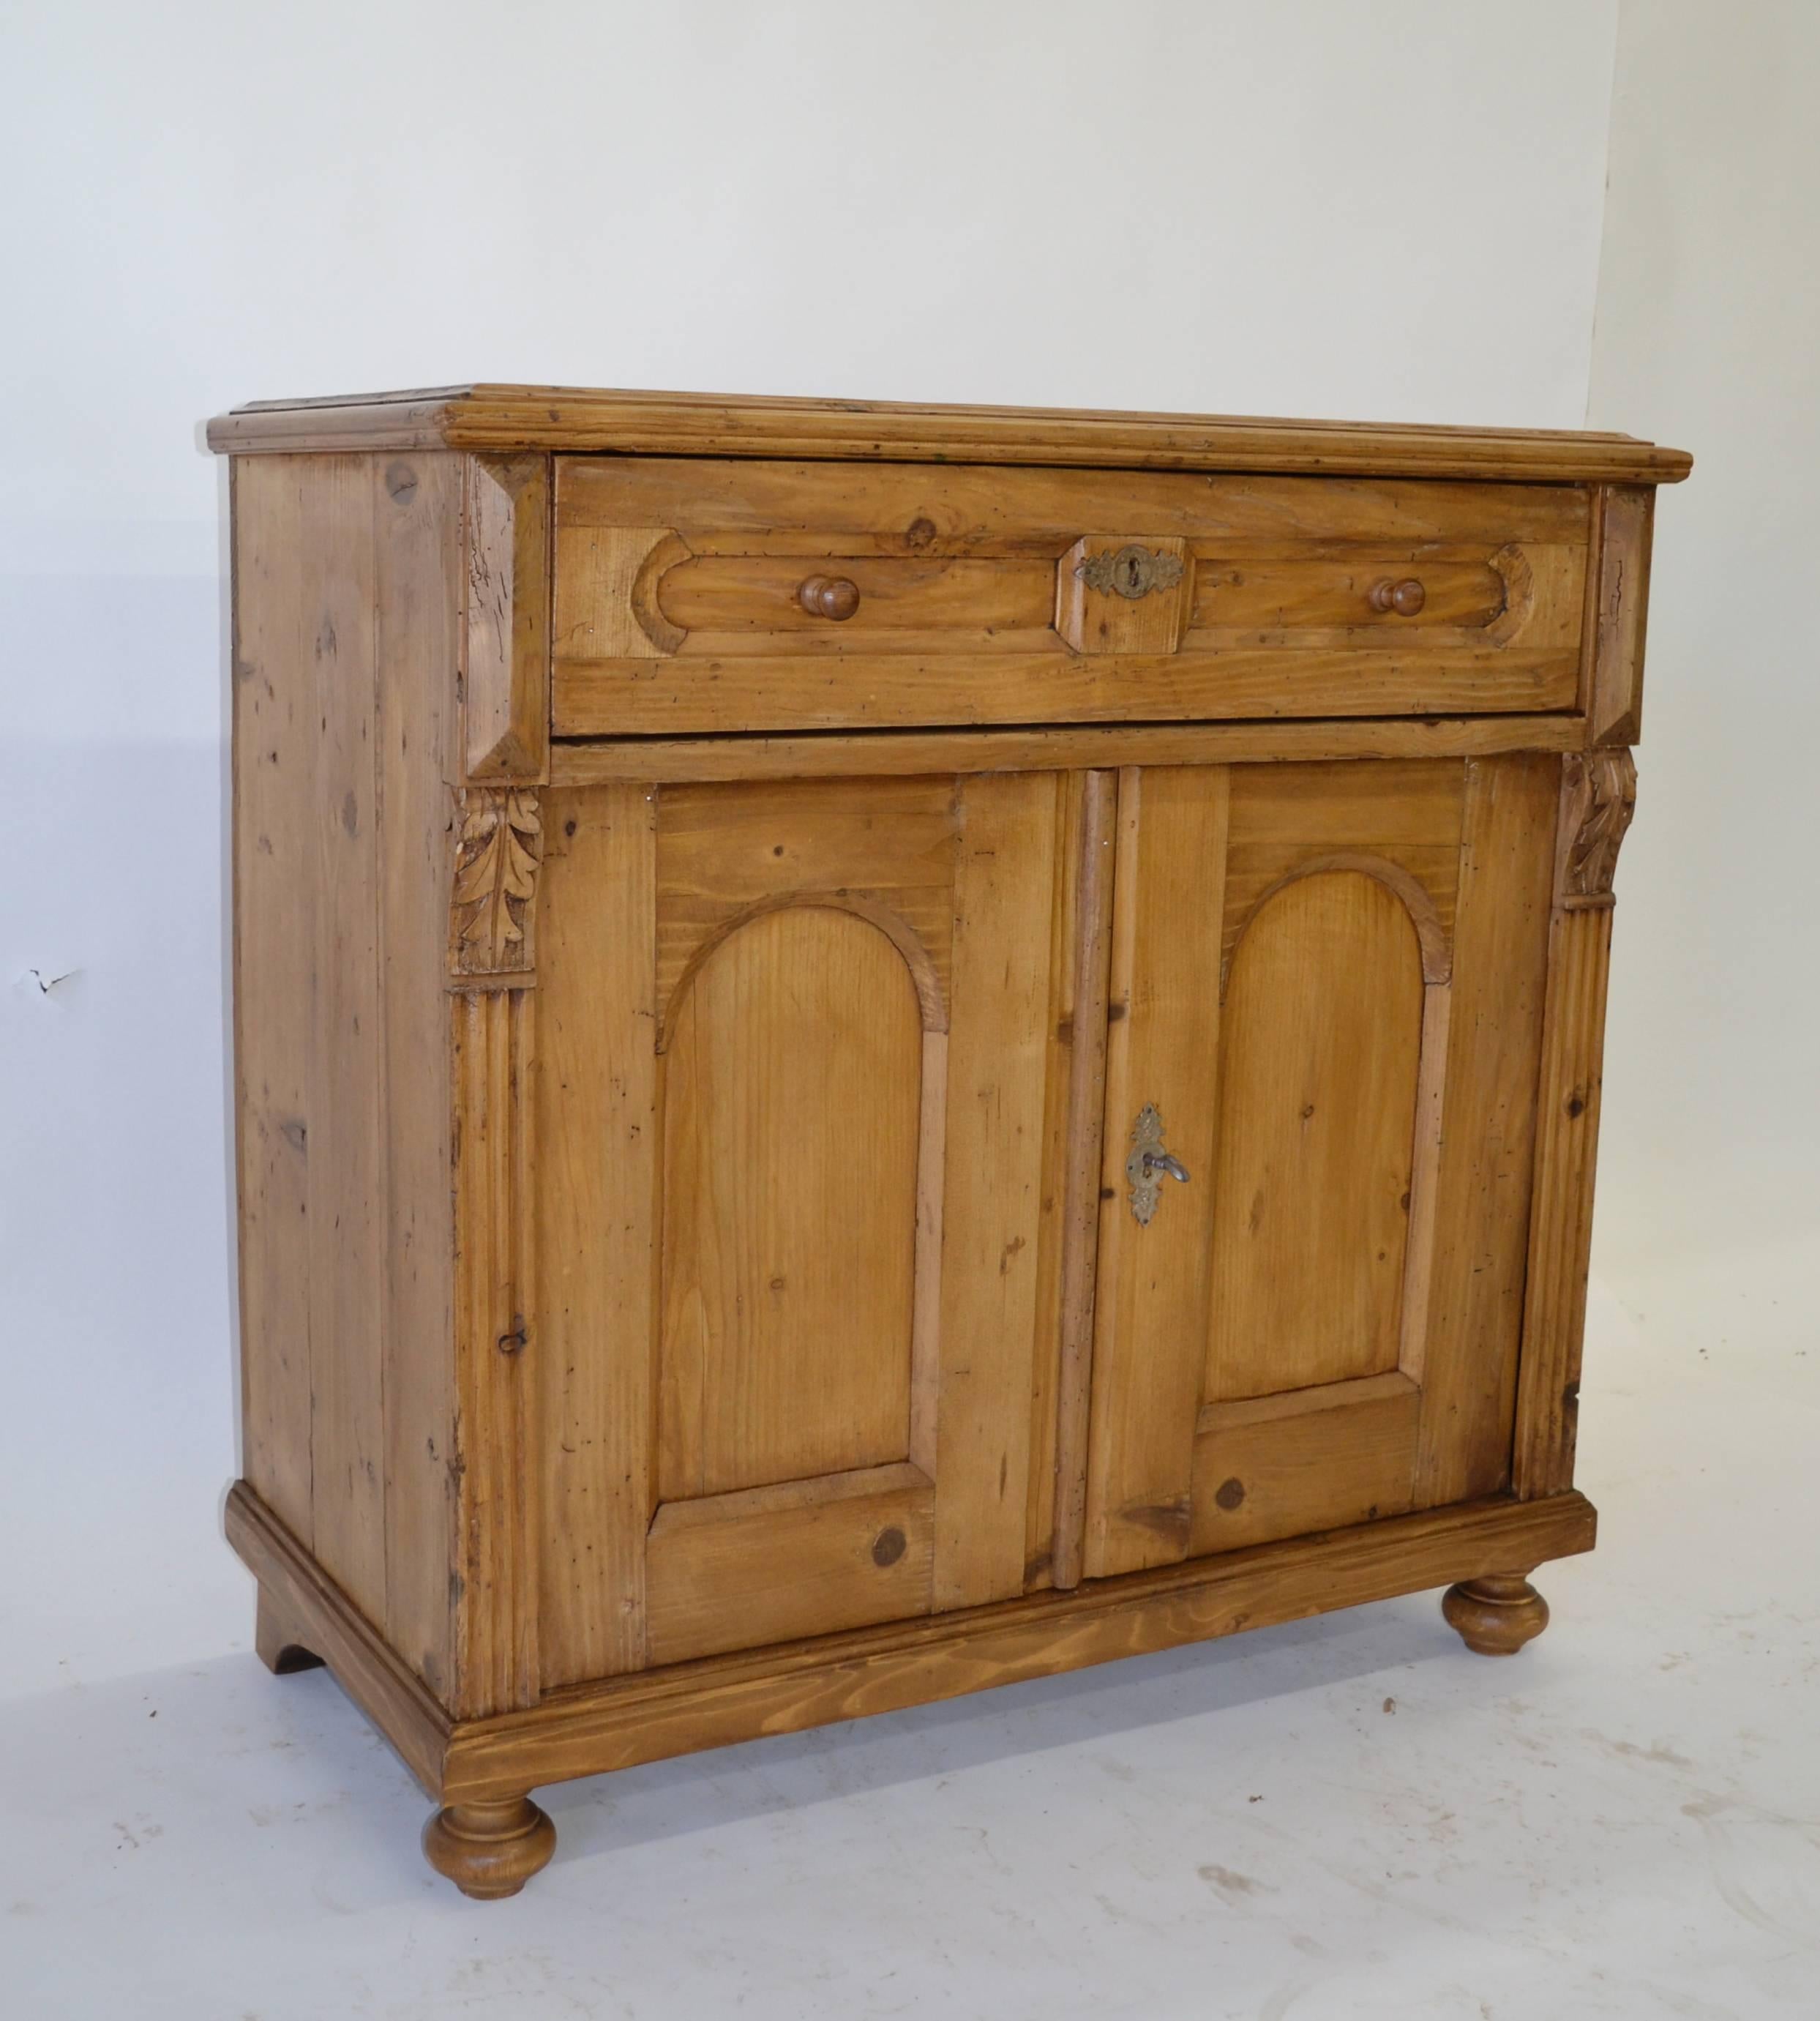 A small pine dresser base with great character and wonderful rich color. A single hand-cut dovetailed faux paneled drawer with zinc escutcheon plate sits above two arch paneled doors. These are flanked on the front sides with applied fluting and